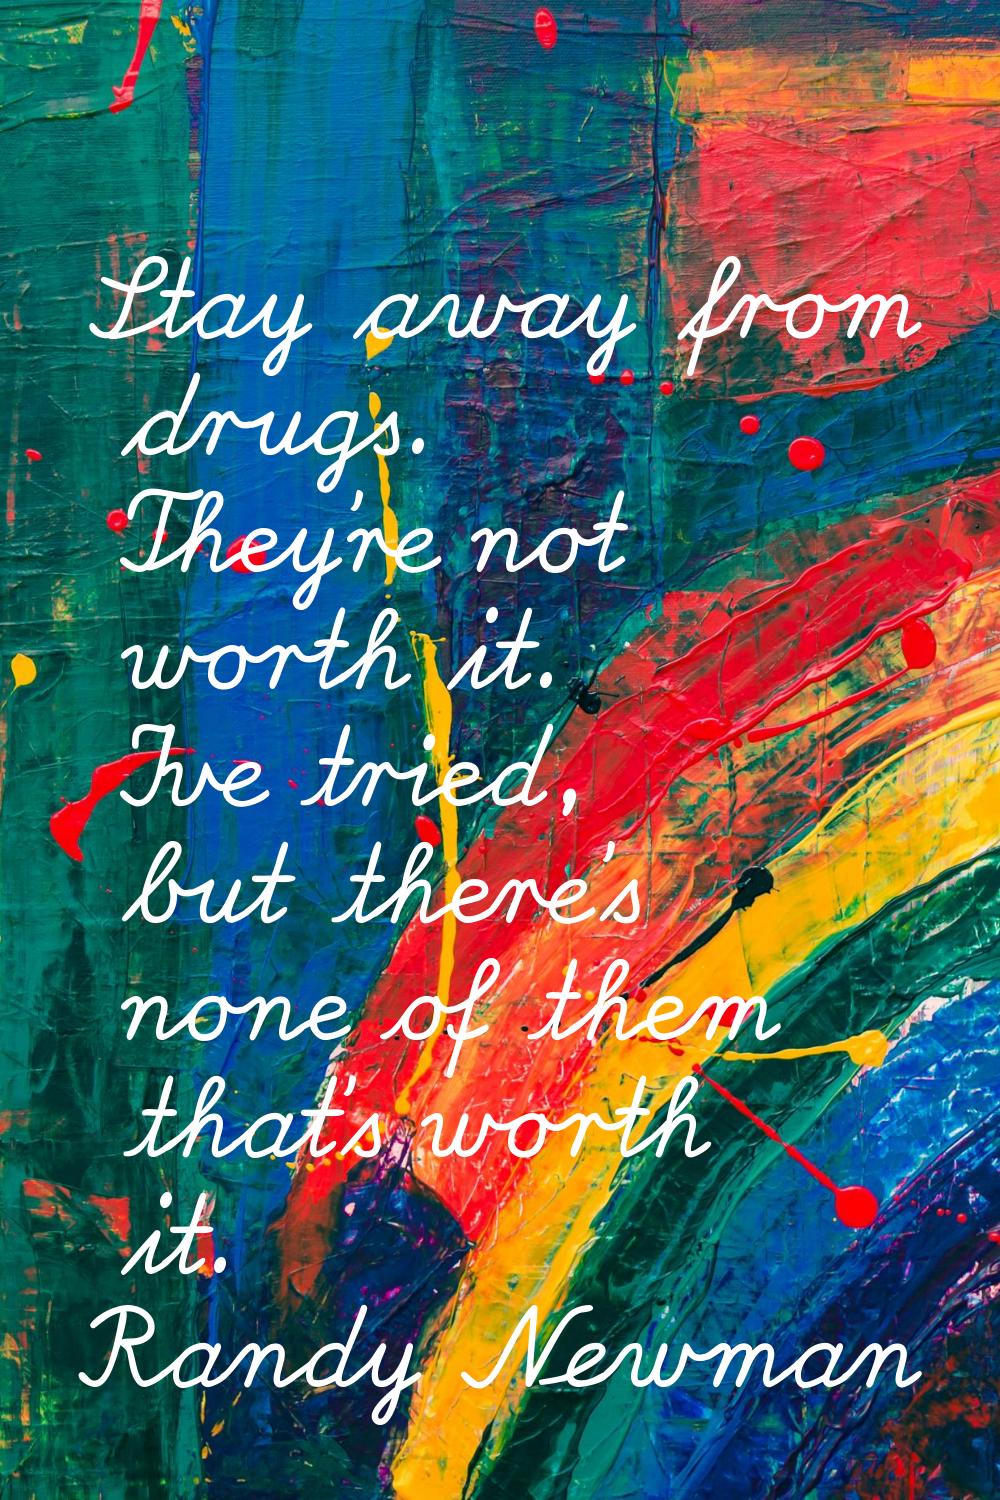 Stay away from drugs. They're not worth it. I've tried, but there's none of them that's worth it.